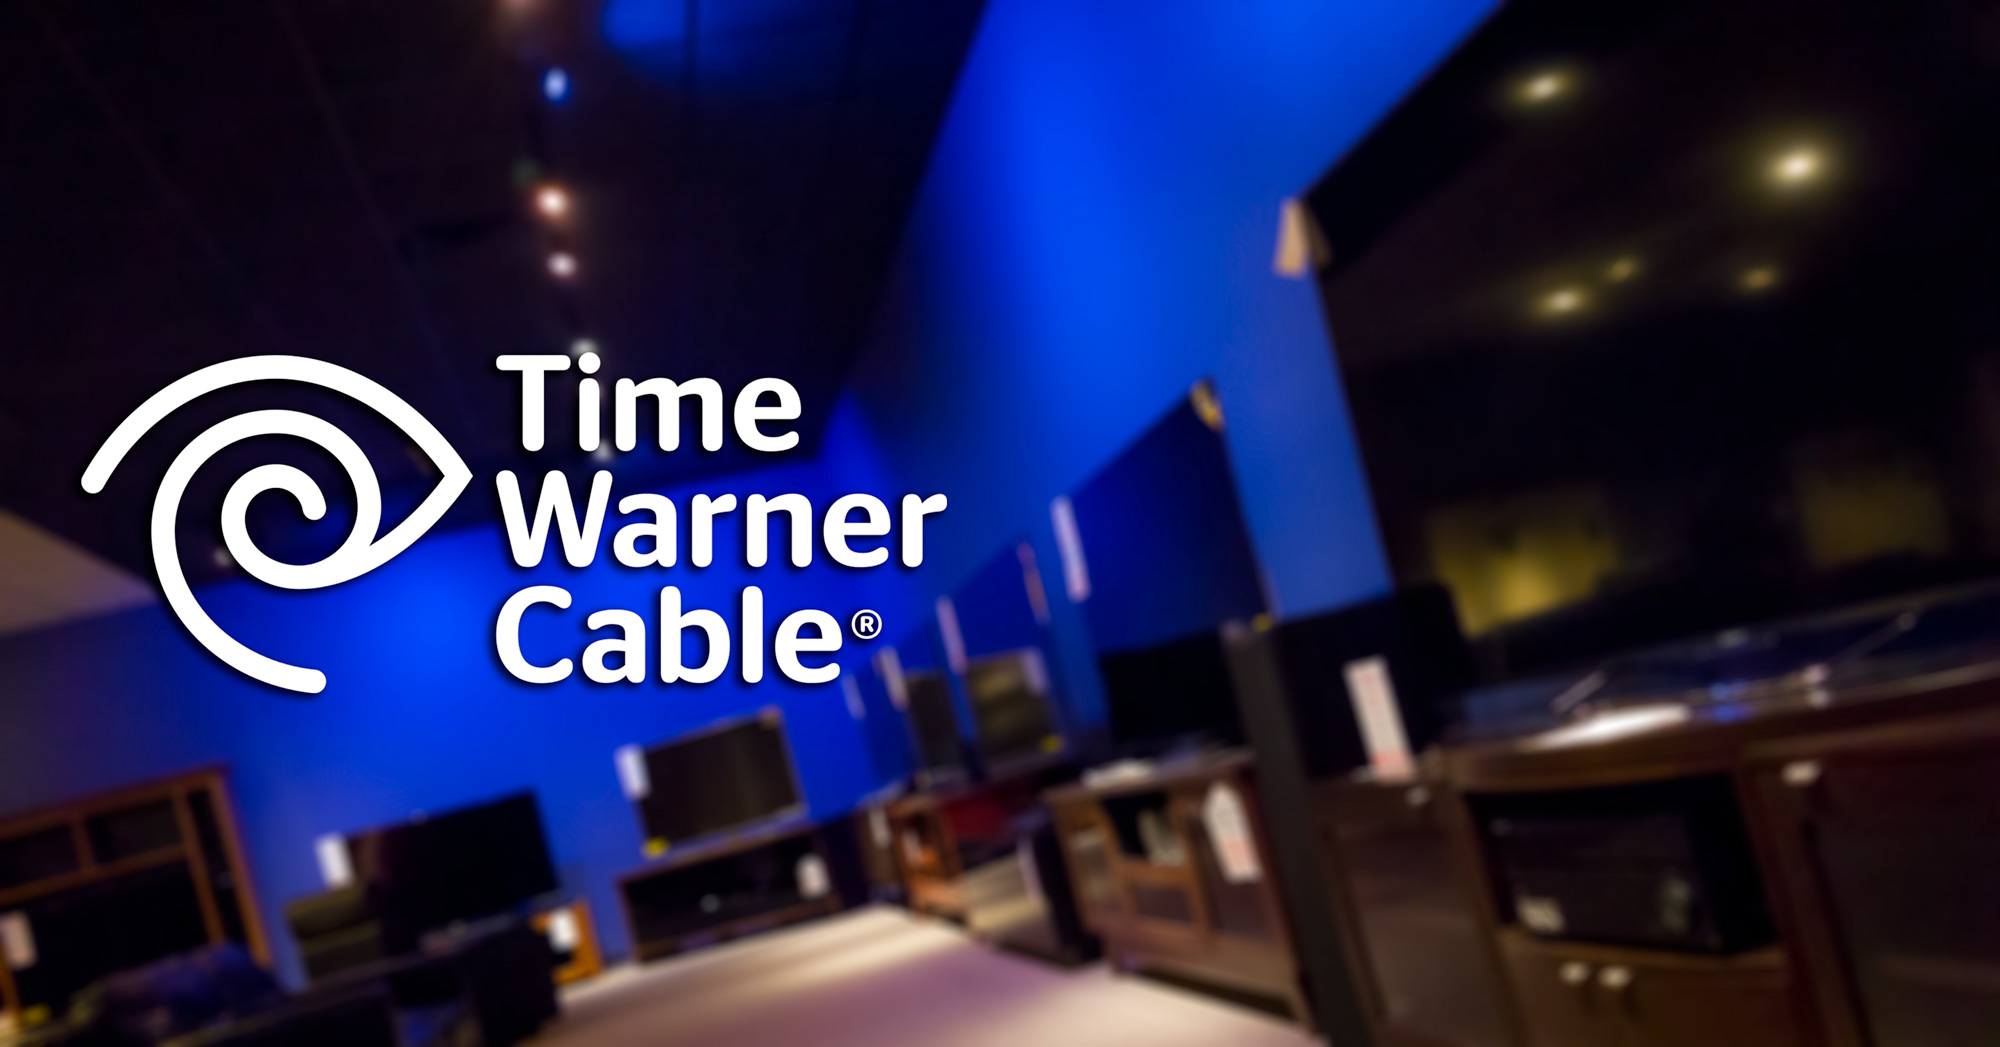 What Time Warner Cable’s all-digital transition means for you | Suess